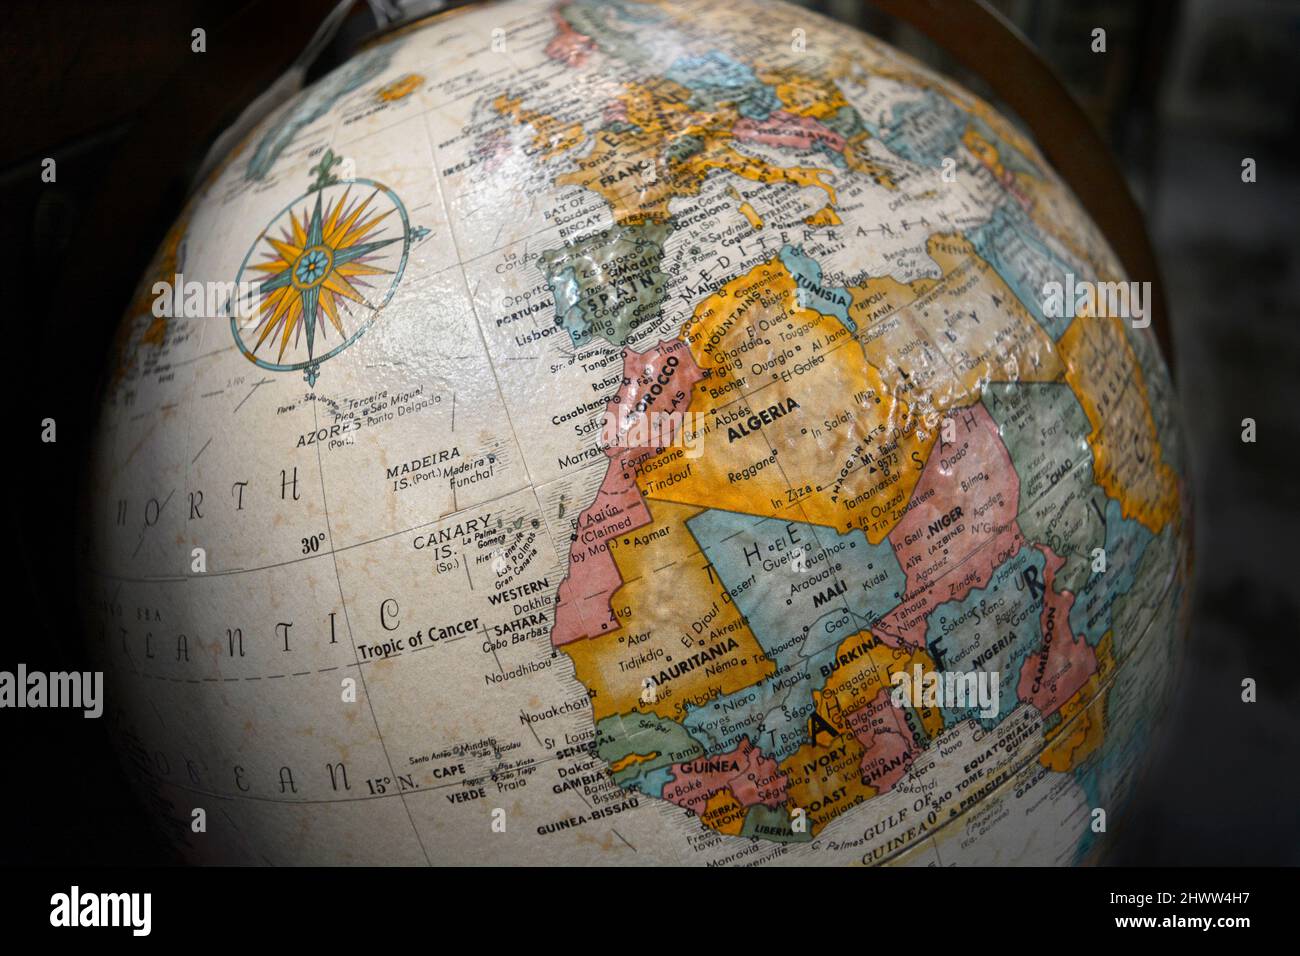 A vintage globe by Replogle, for sale in an antique shop, shows North African countries Algeria, Tunisia, Mauritania, Morocco and Atlantic Ocean. Stock Photo